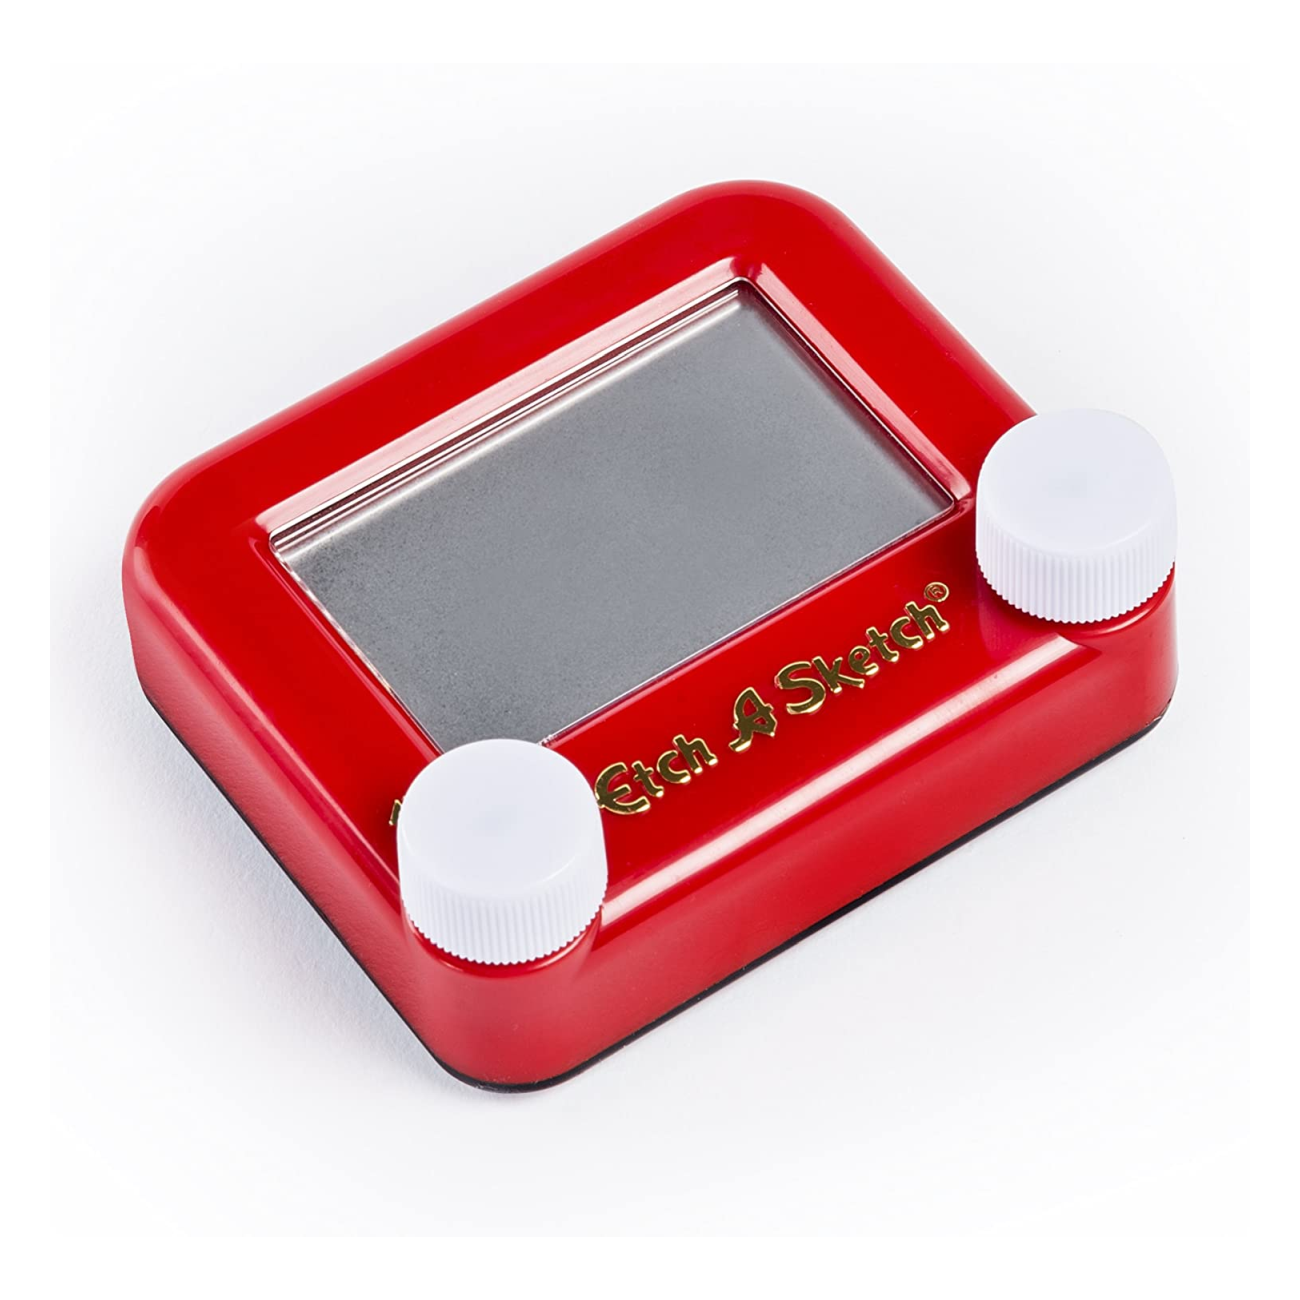 Etch A Sketch The Perfect Modern Toy - Antique Trader